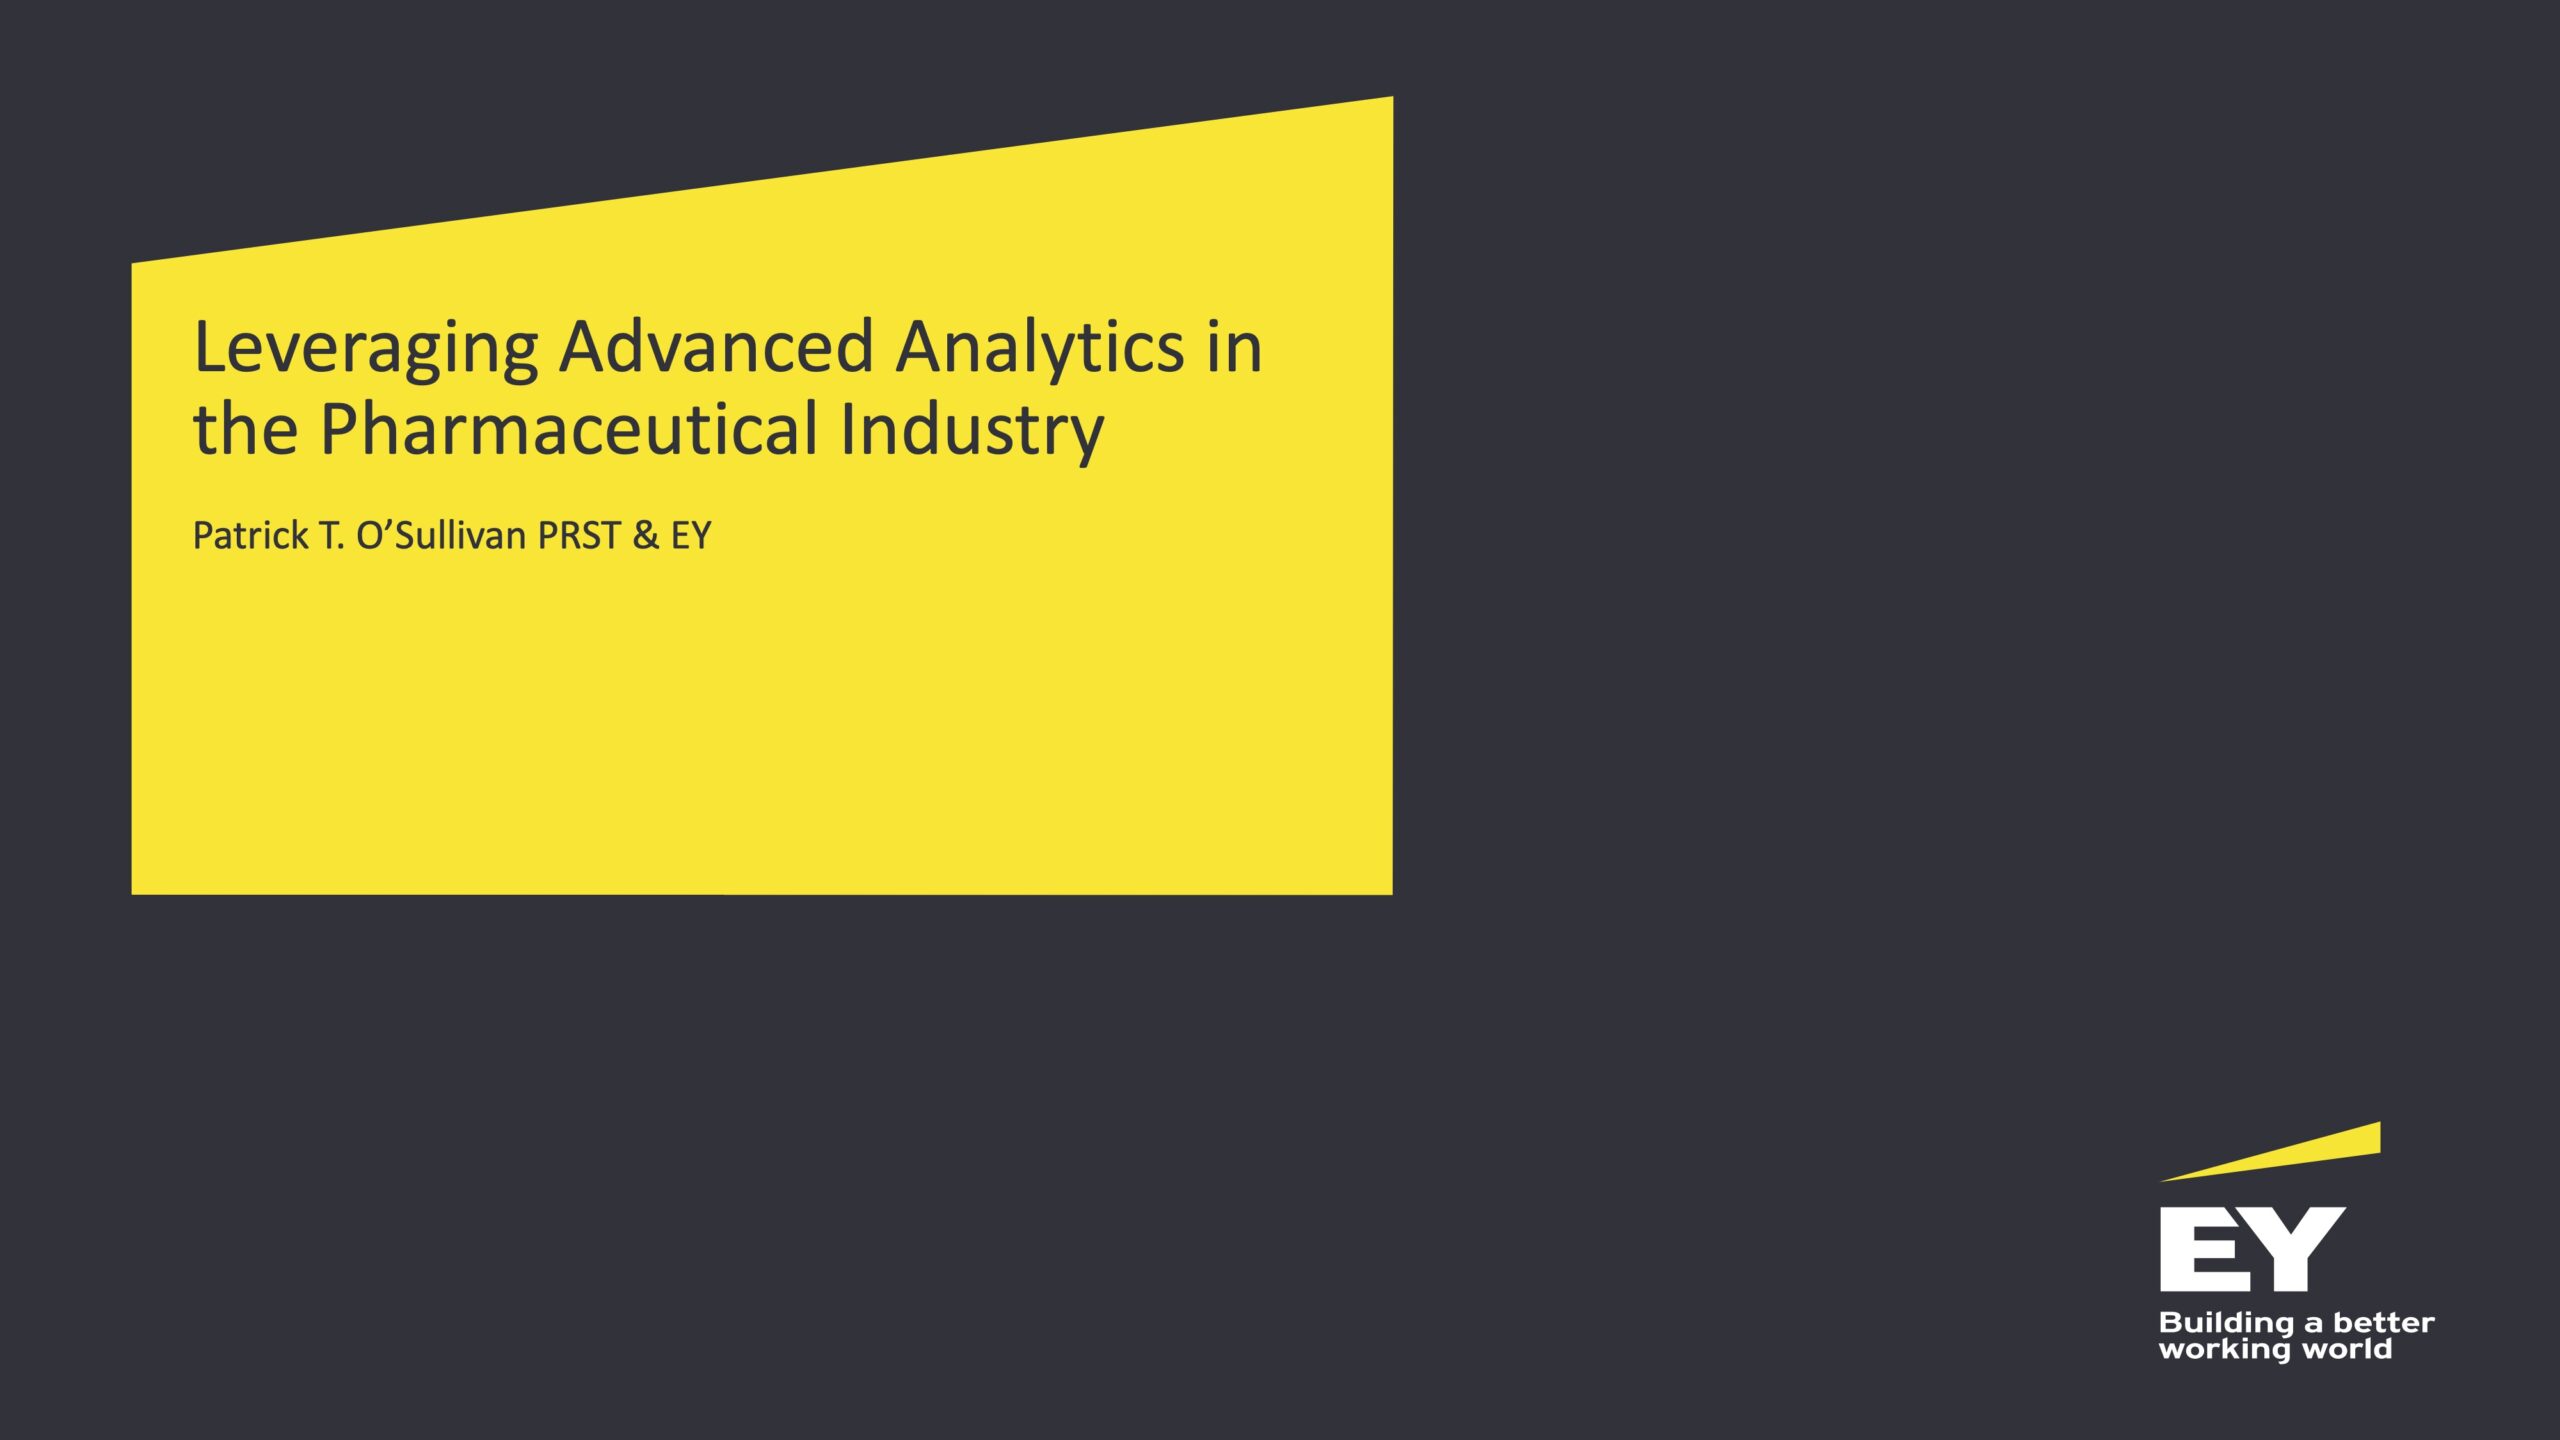 Leveraging Advanced Analytics in the Pharmaceutical Industry